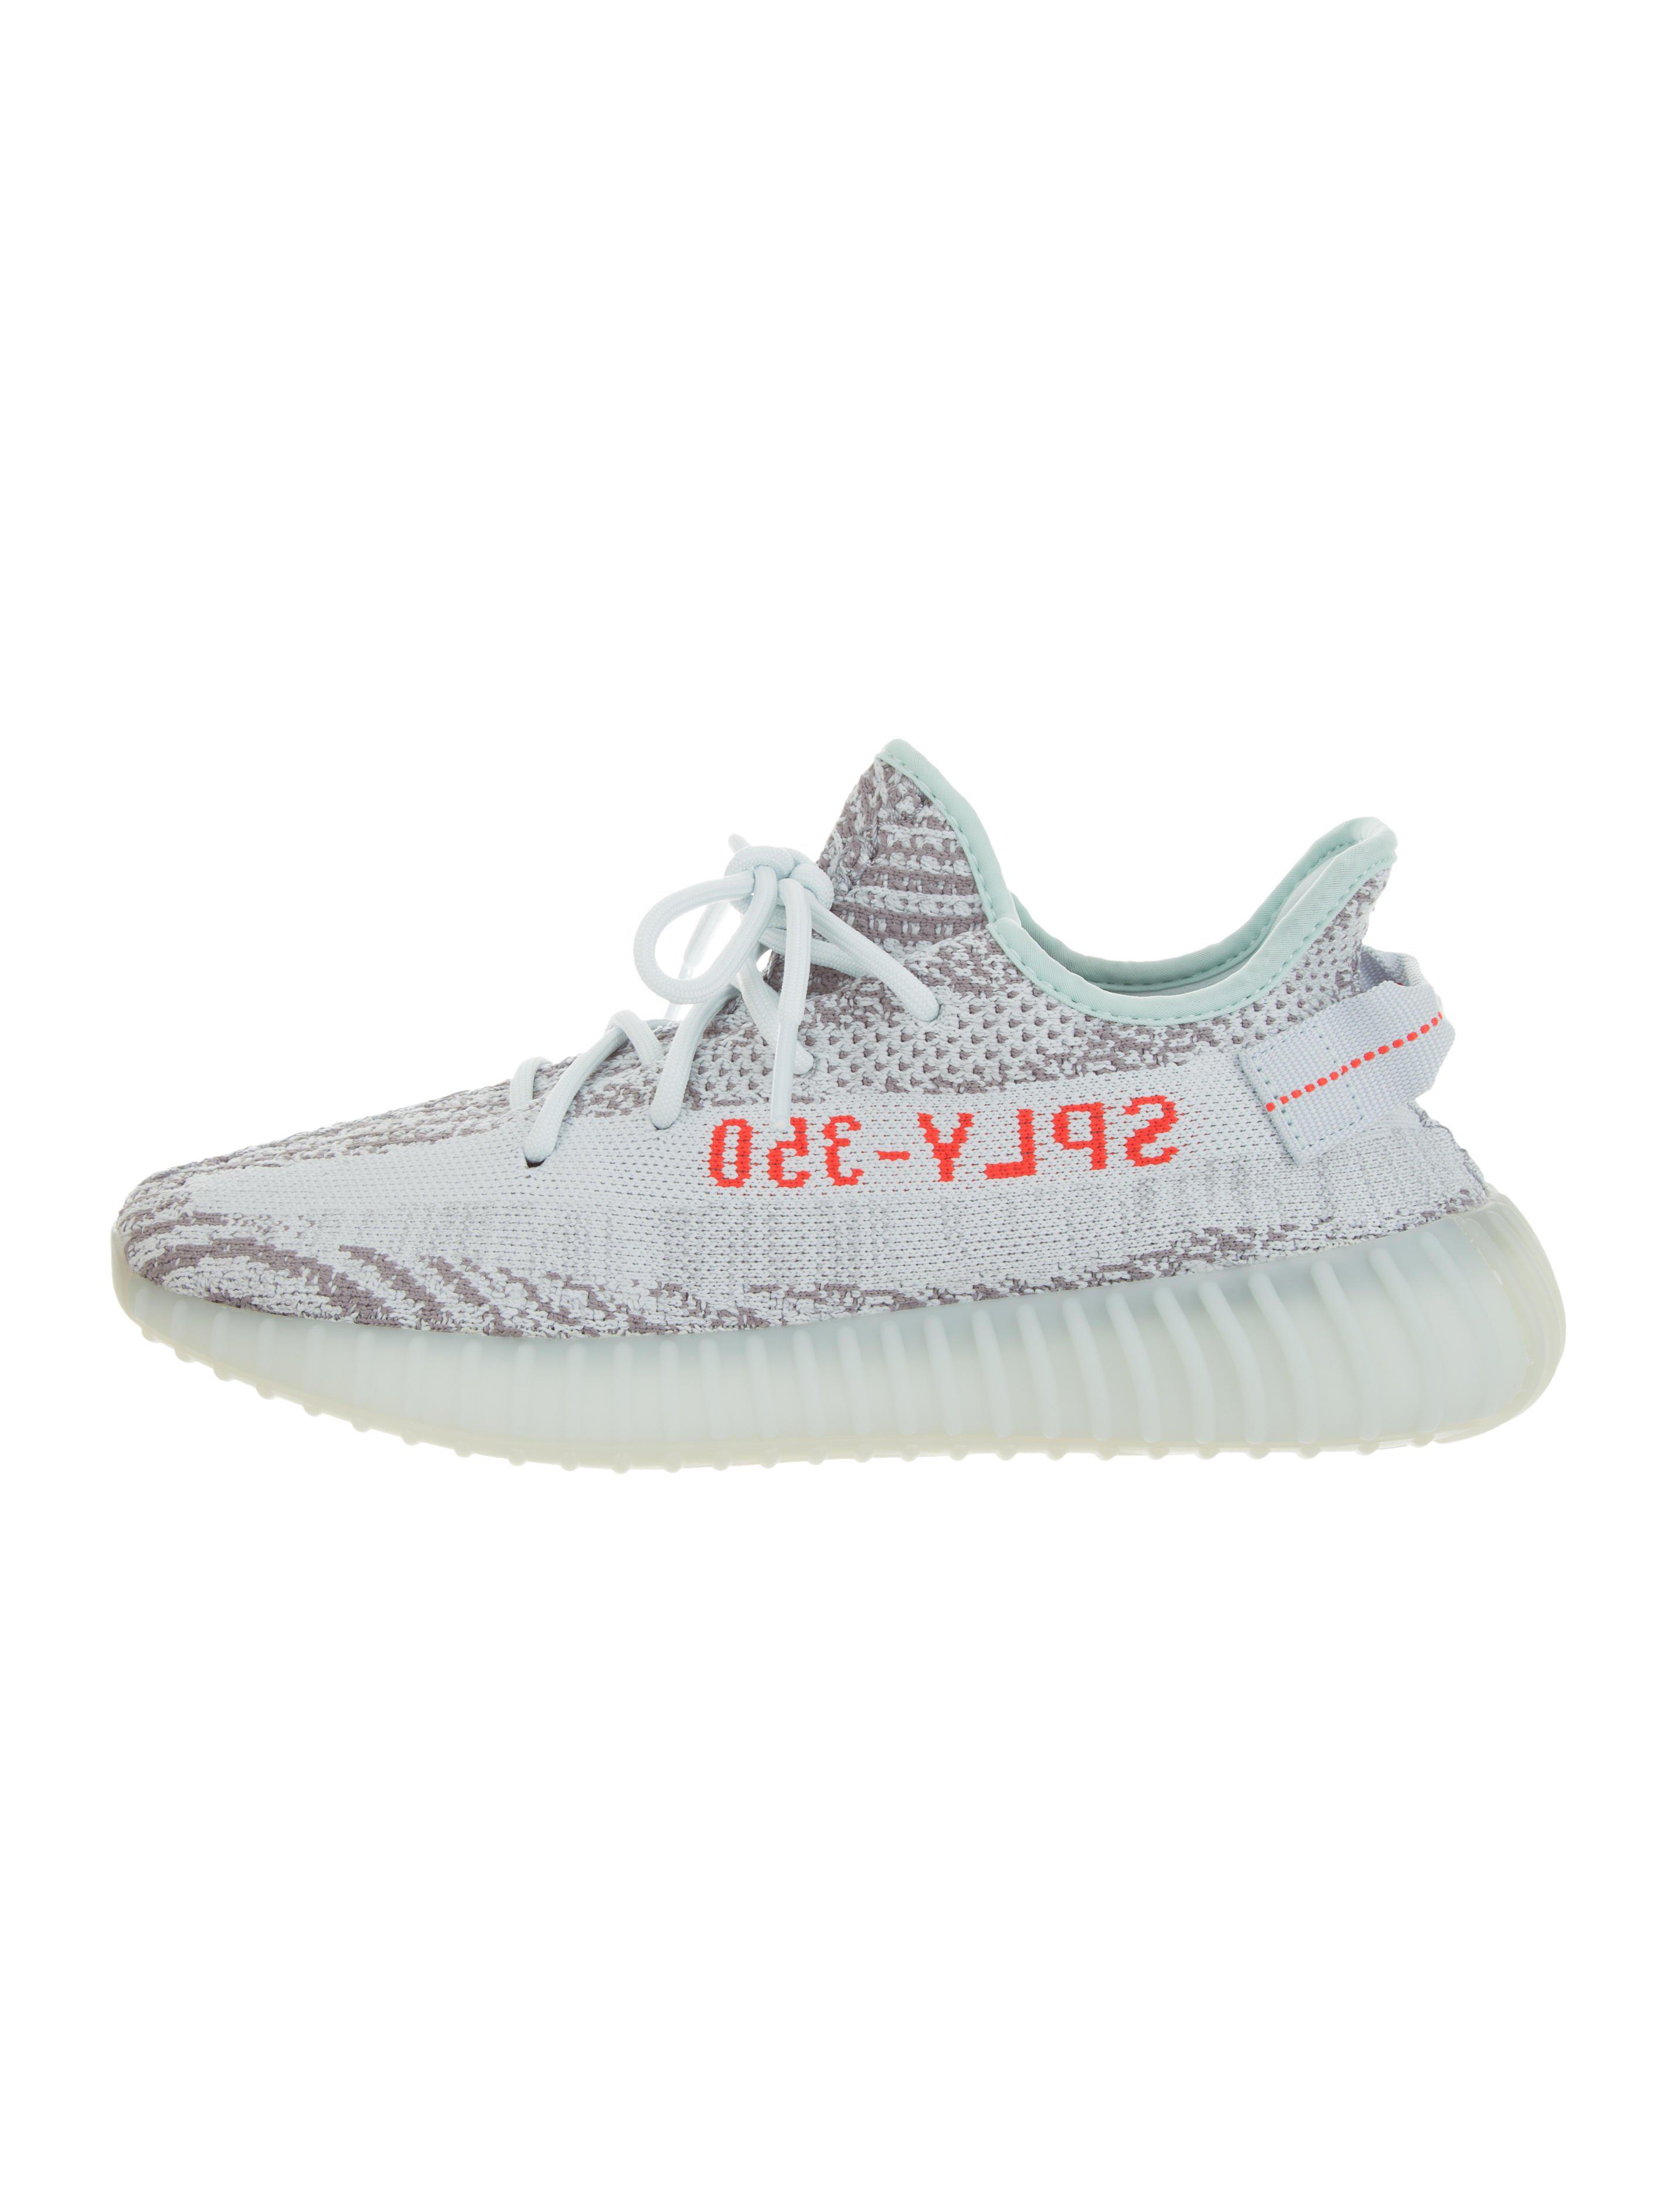 Cheap Adidas Yeezy Boost 350 V2 ‘Blue Tint’ Sneakers Men’S Size 11 B37571 Rare New